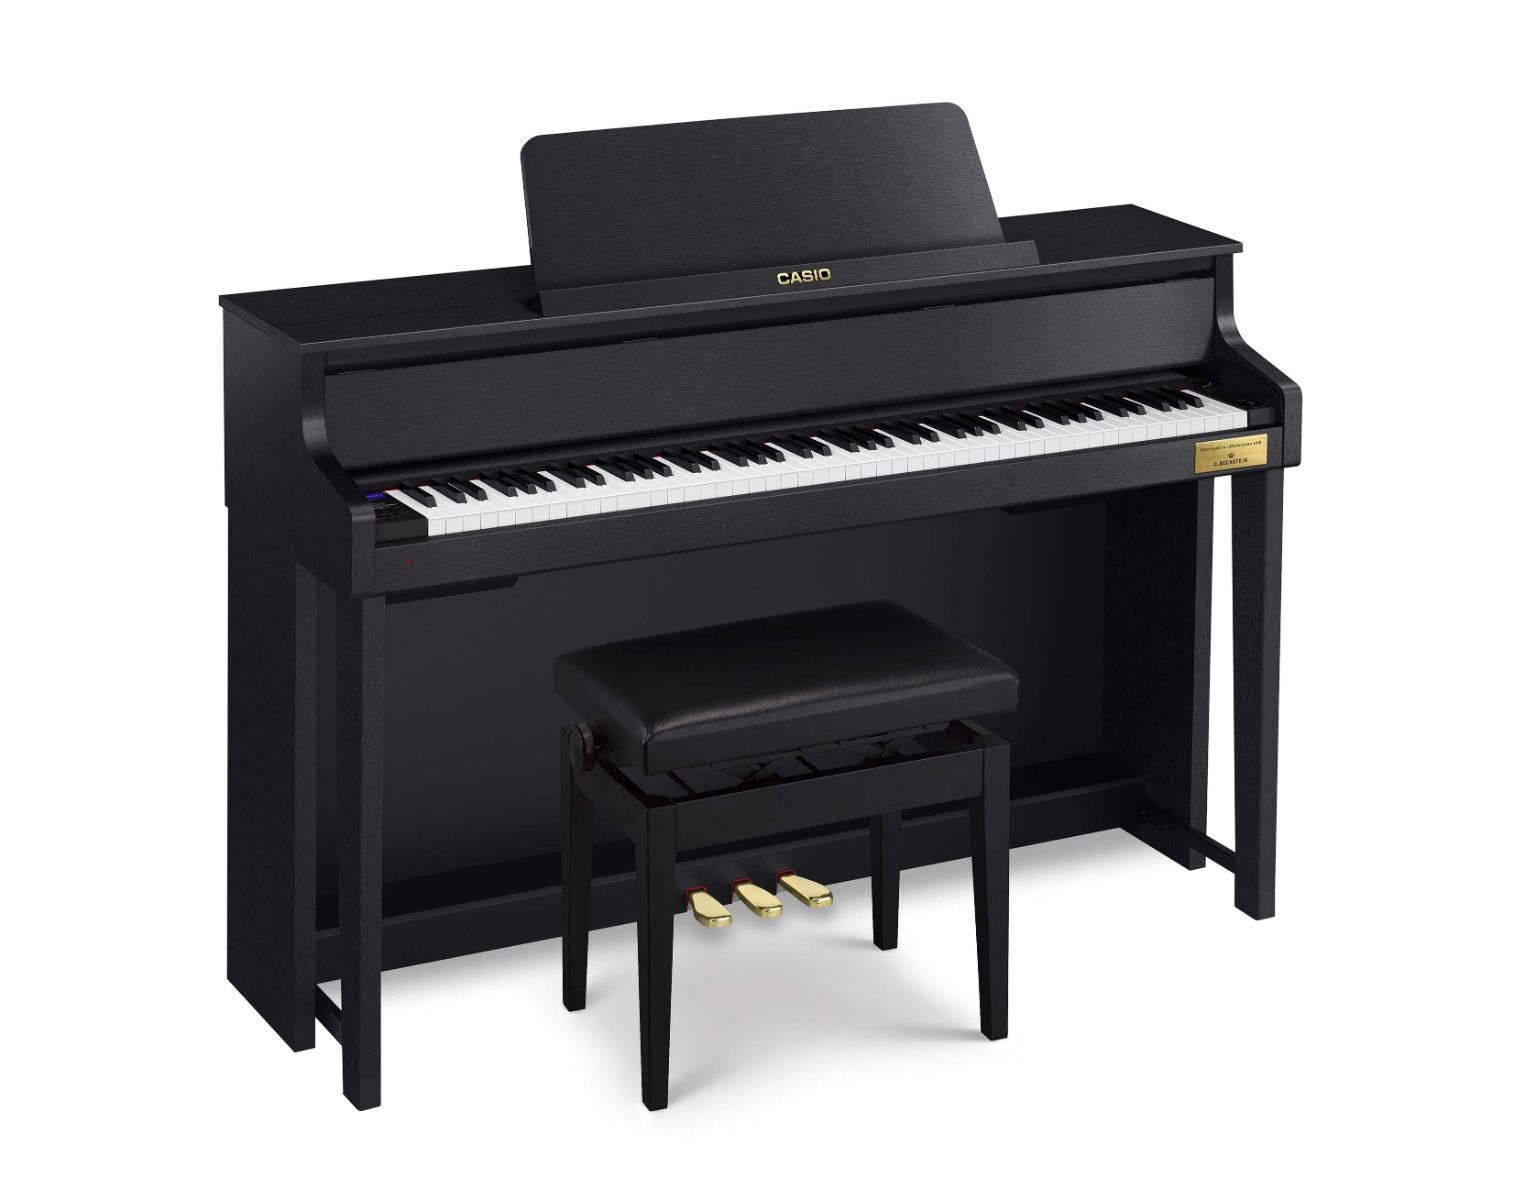 Casio GP-310 Grand Hybrid Piano with Adjustable Bench